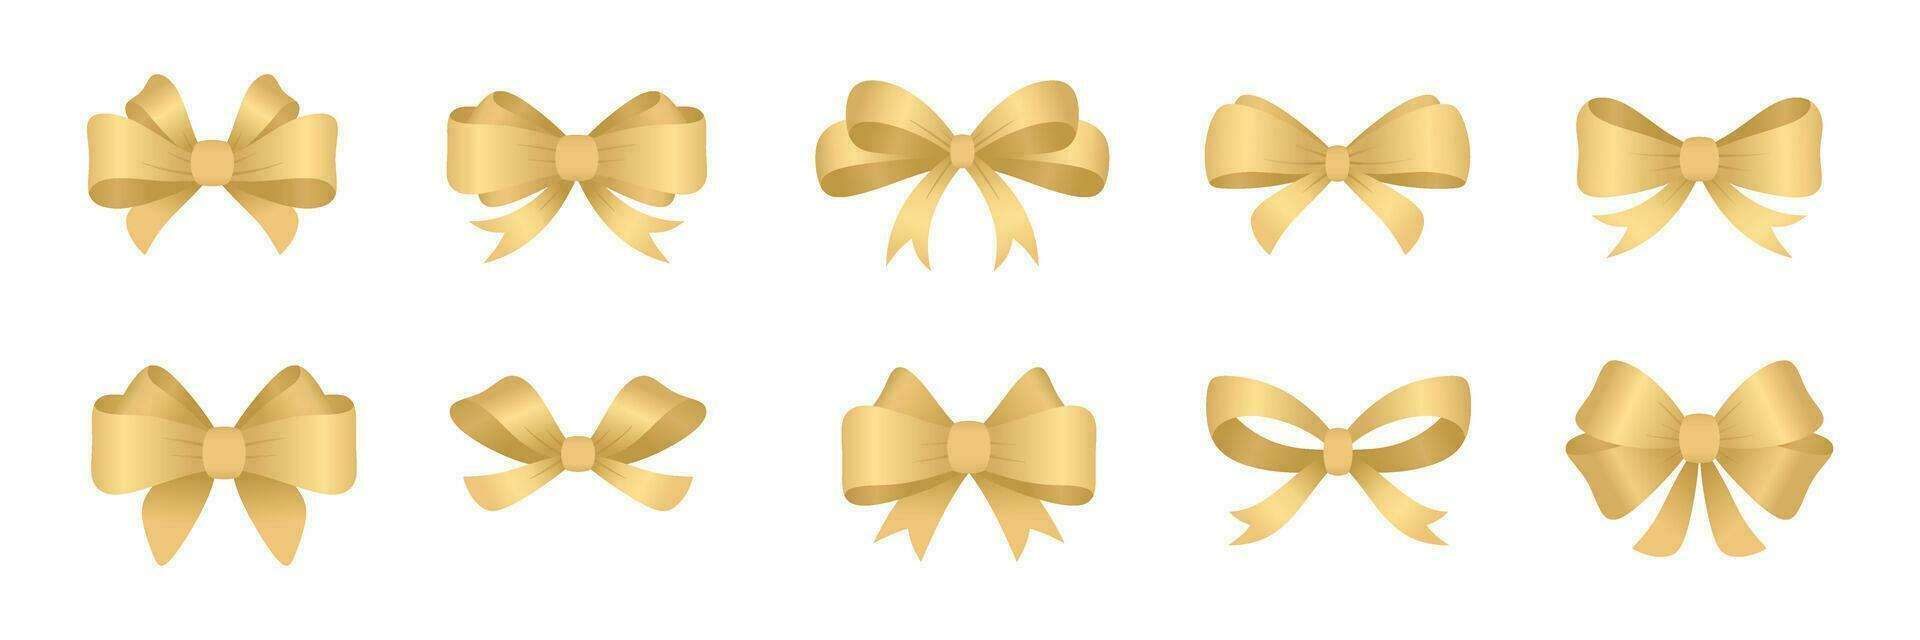 various golden gift bow collection vector